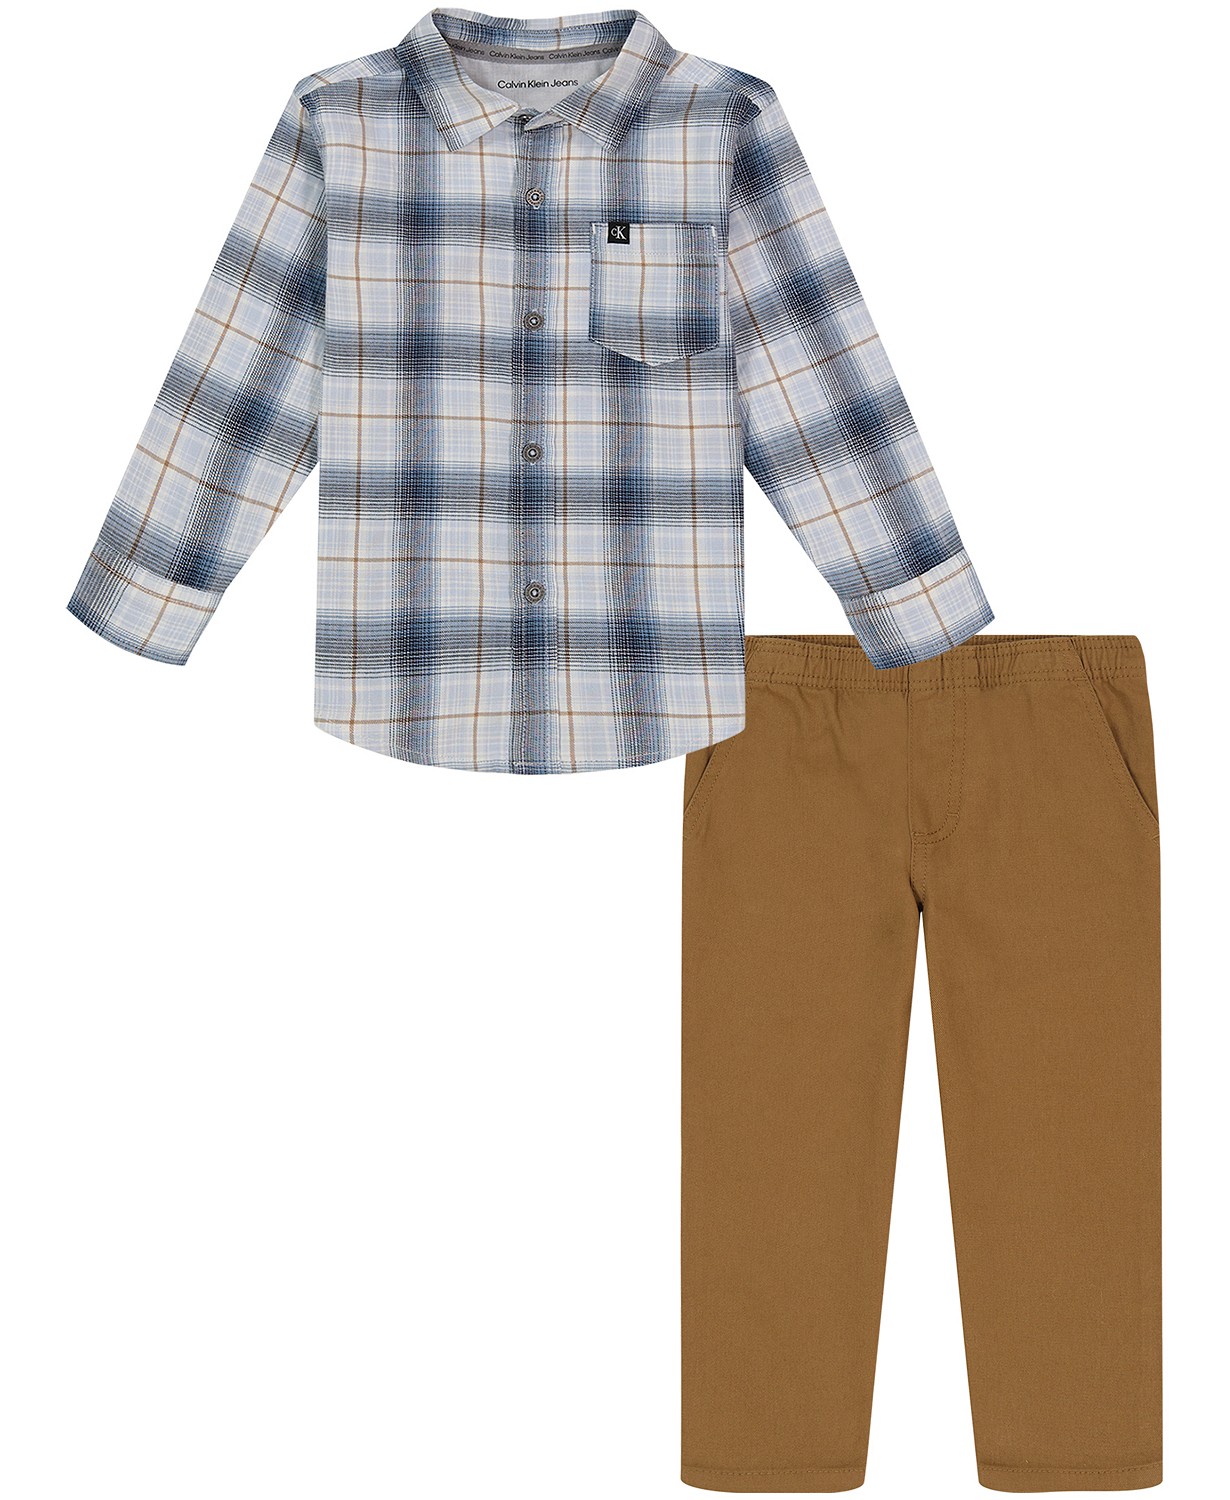  Toddler Boys Plaid Long Sleeve Button Front Shirt and Prewashed Twill Pants 2 Piece Set